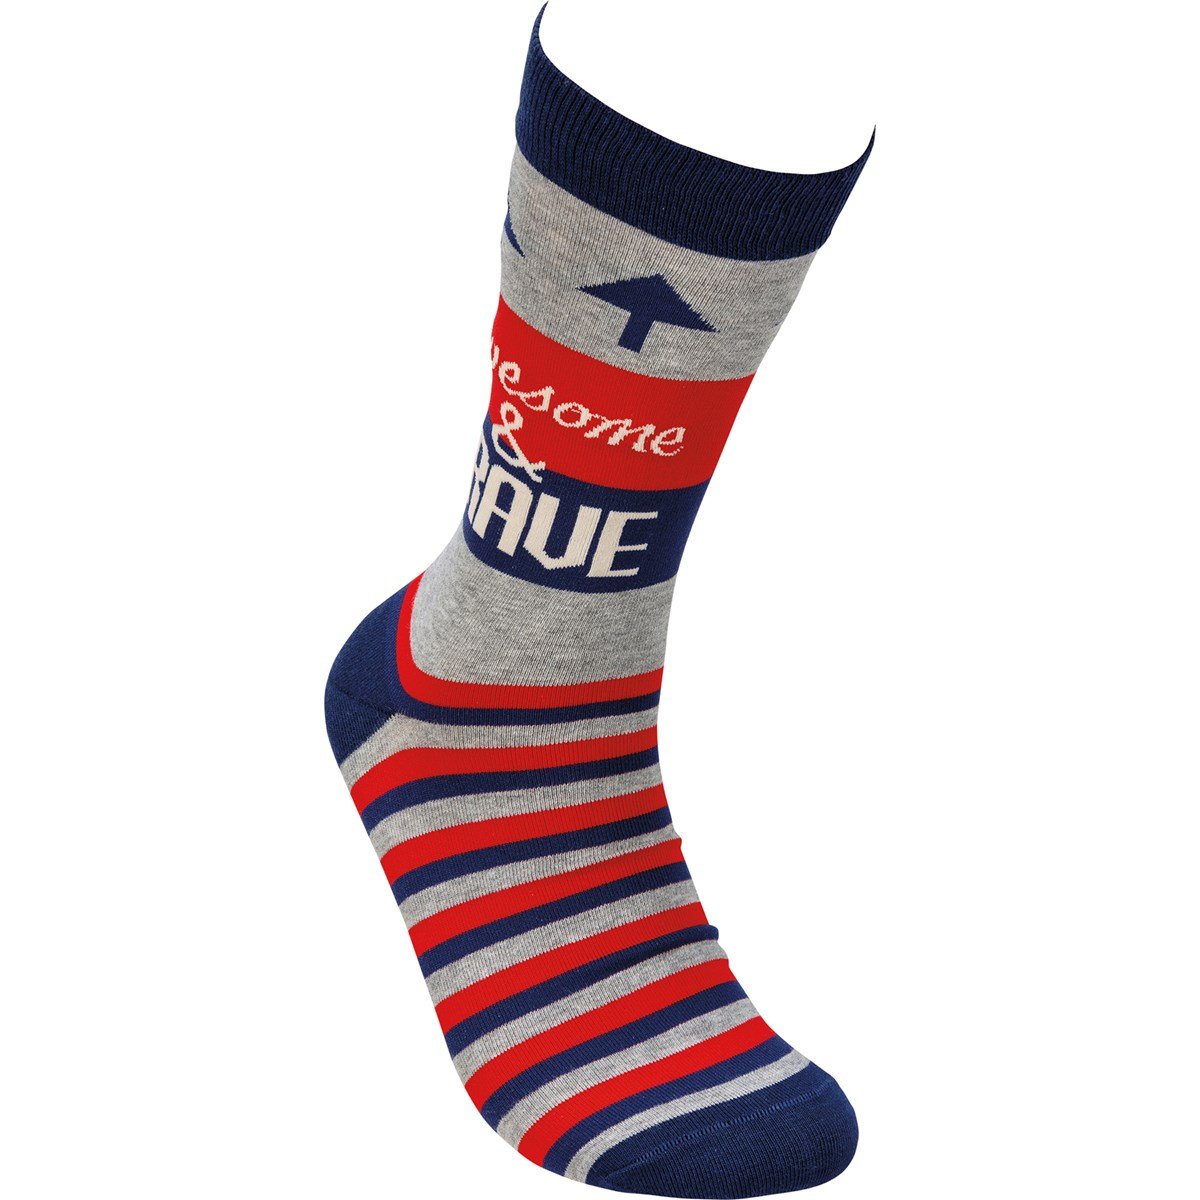 Socks - Awesome & Brave - One Size Fits Most - Cotton, Nylon, Spandex